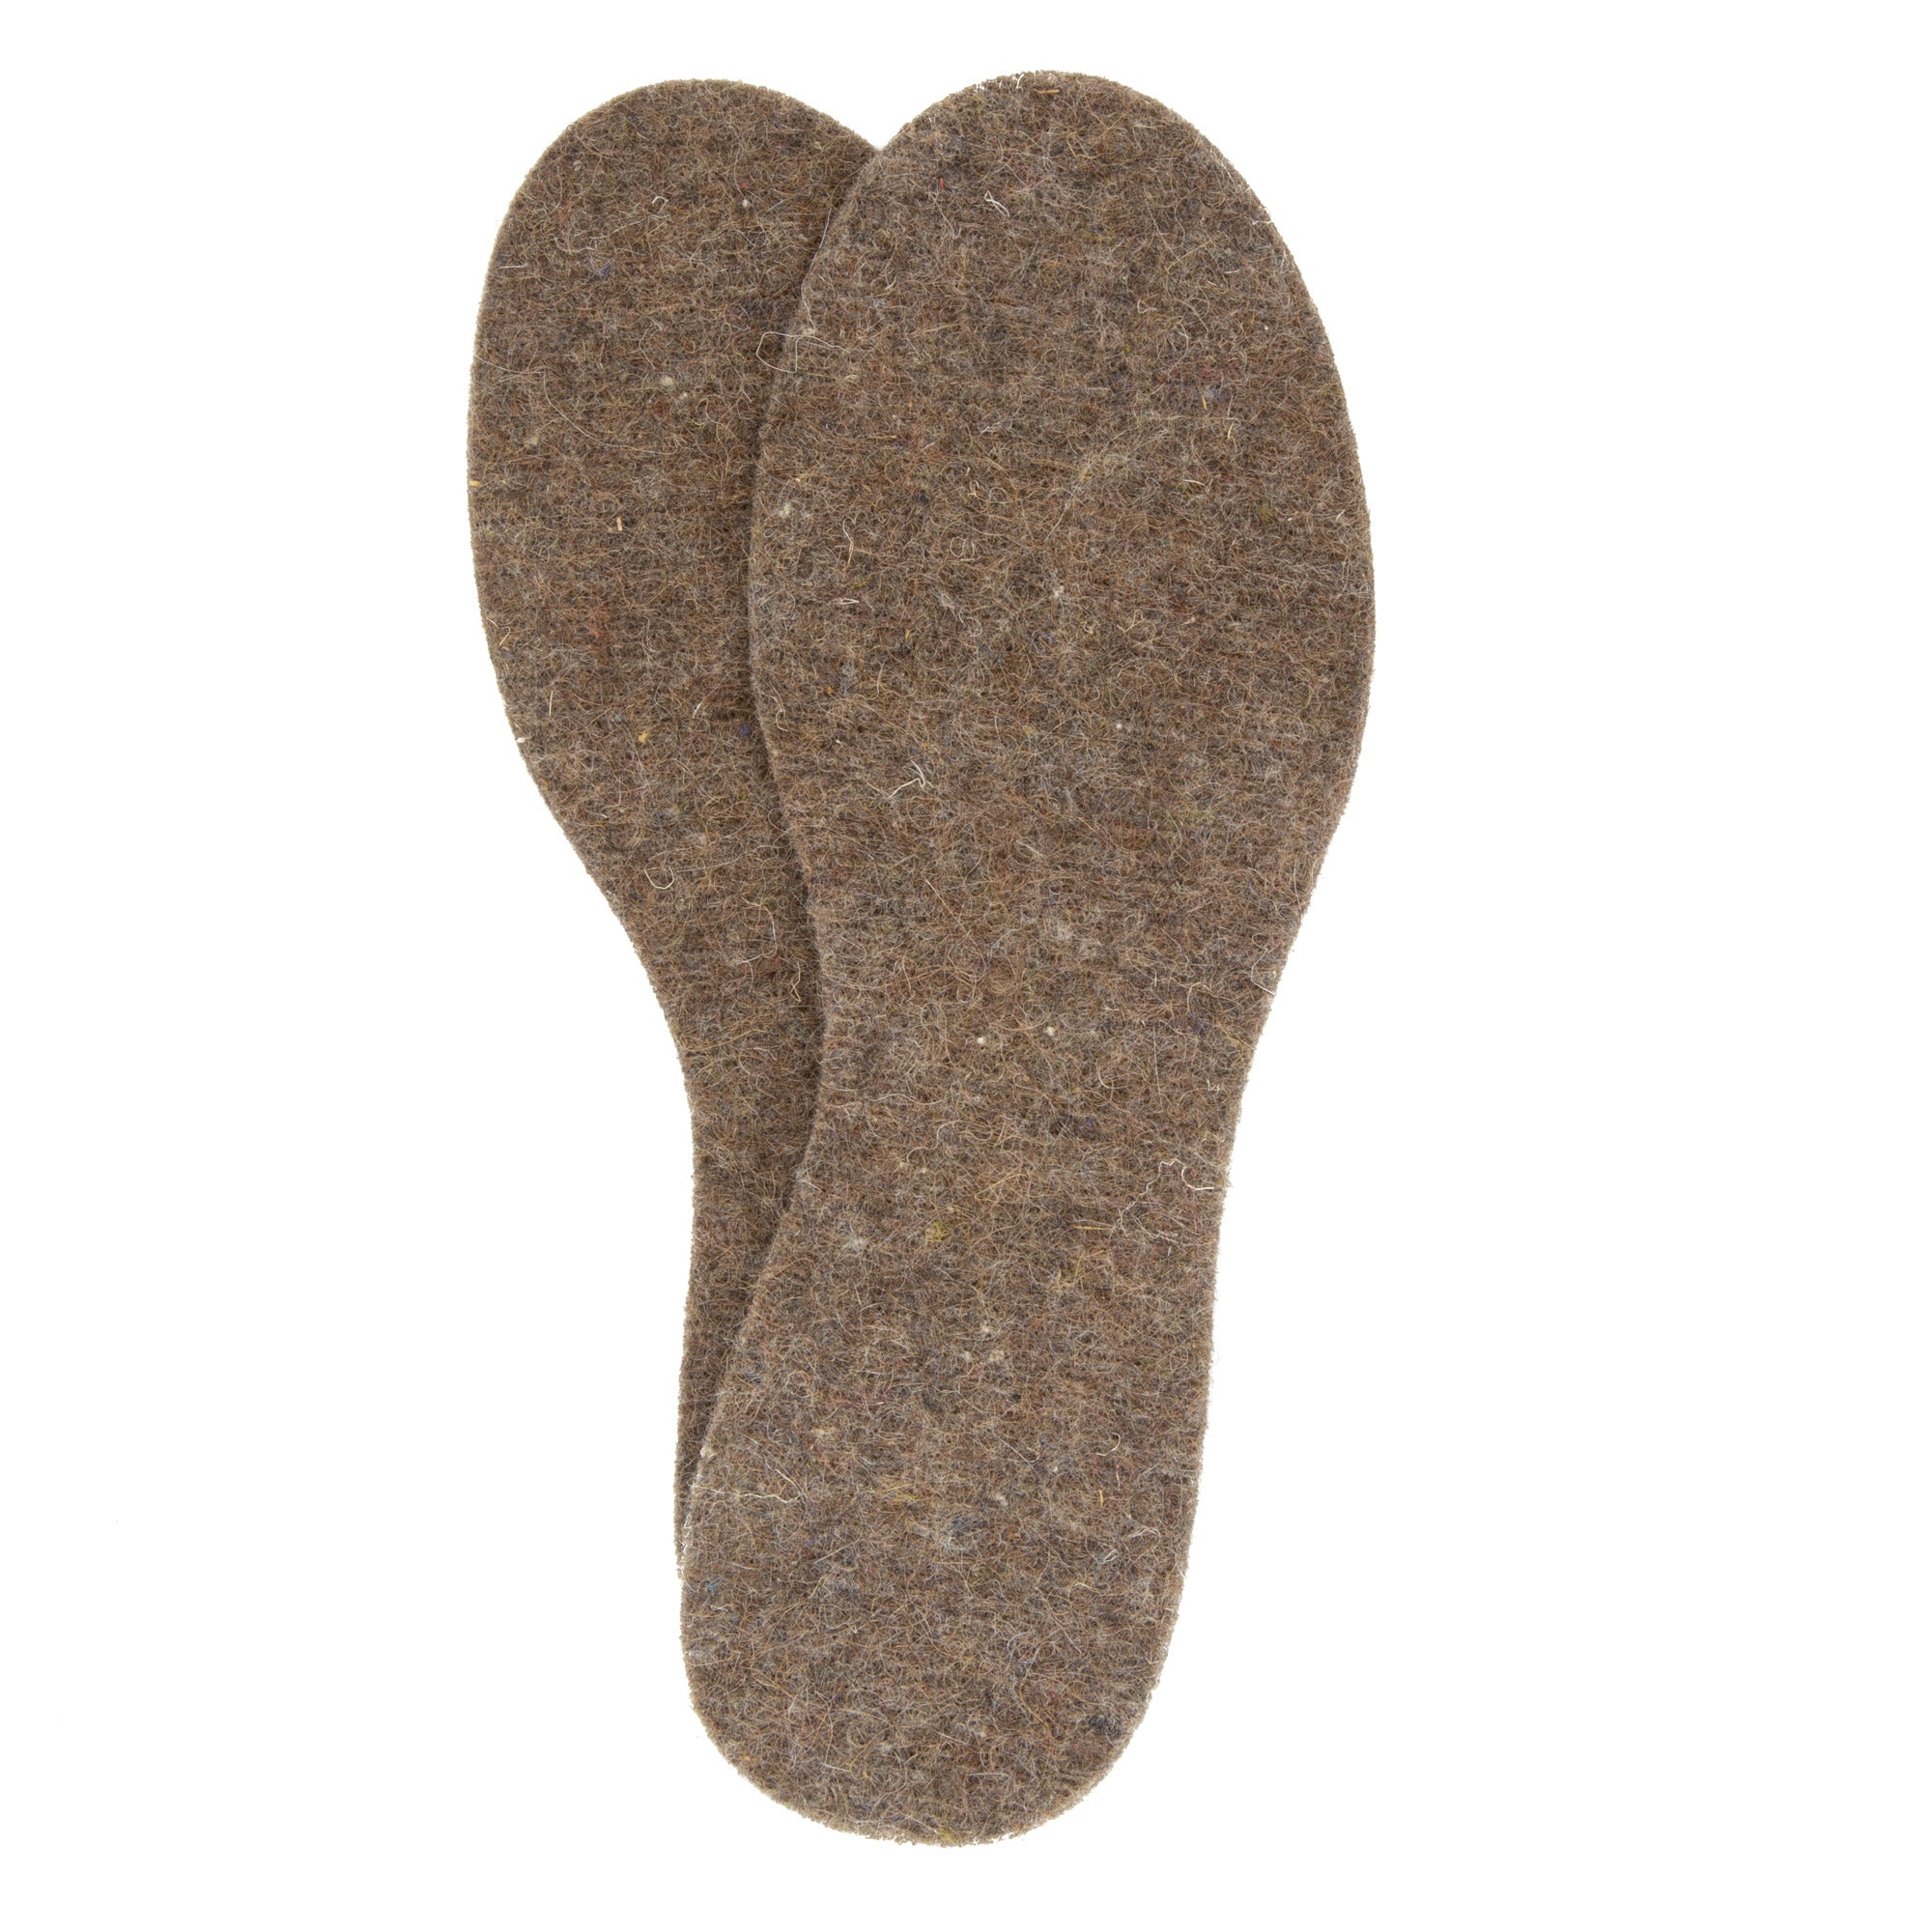 Bison Fiber Insoles, The Buffalo Wool Co.